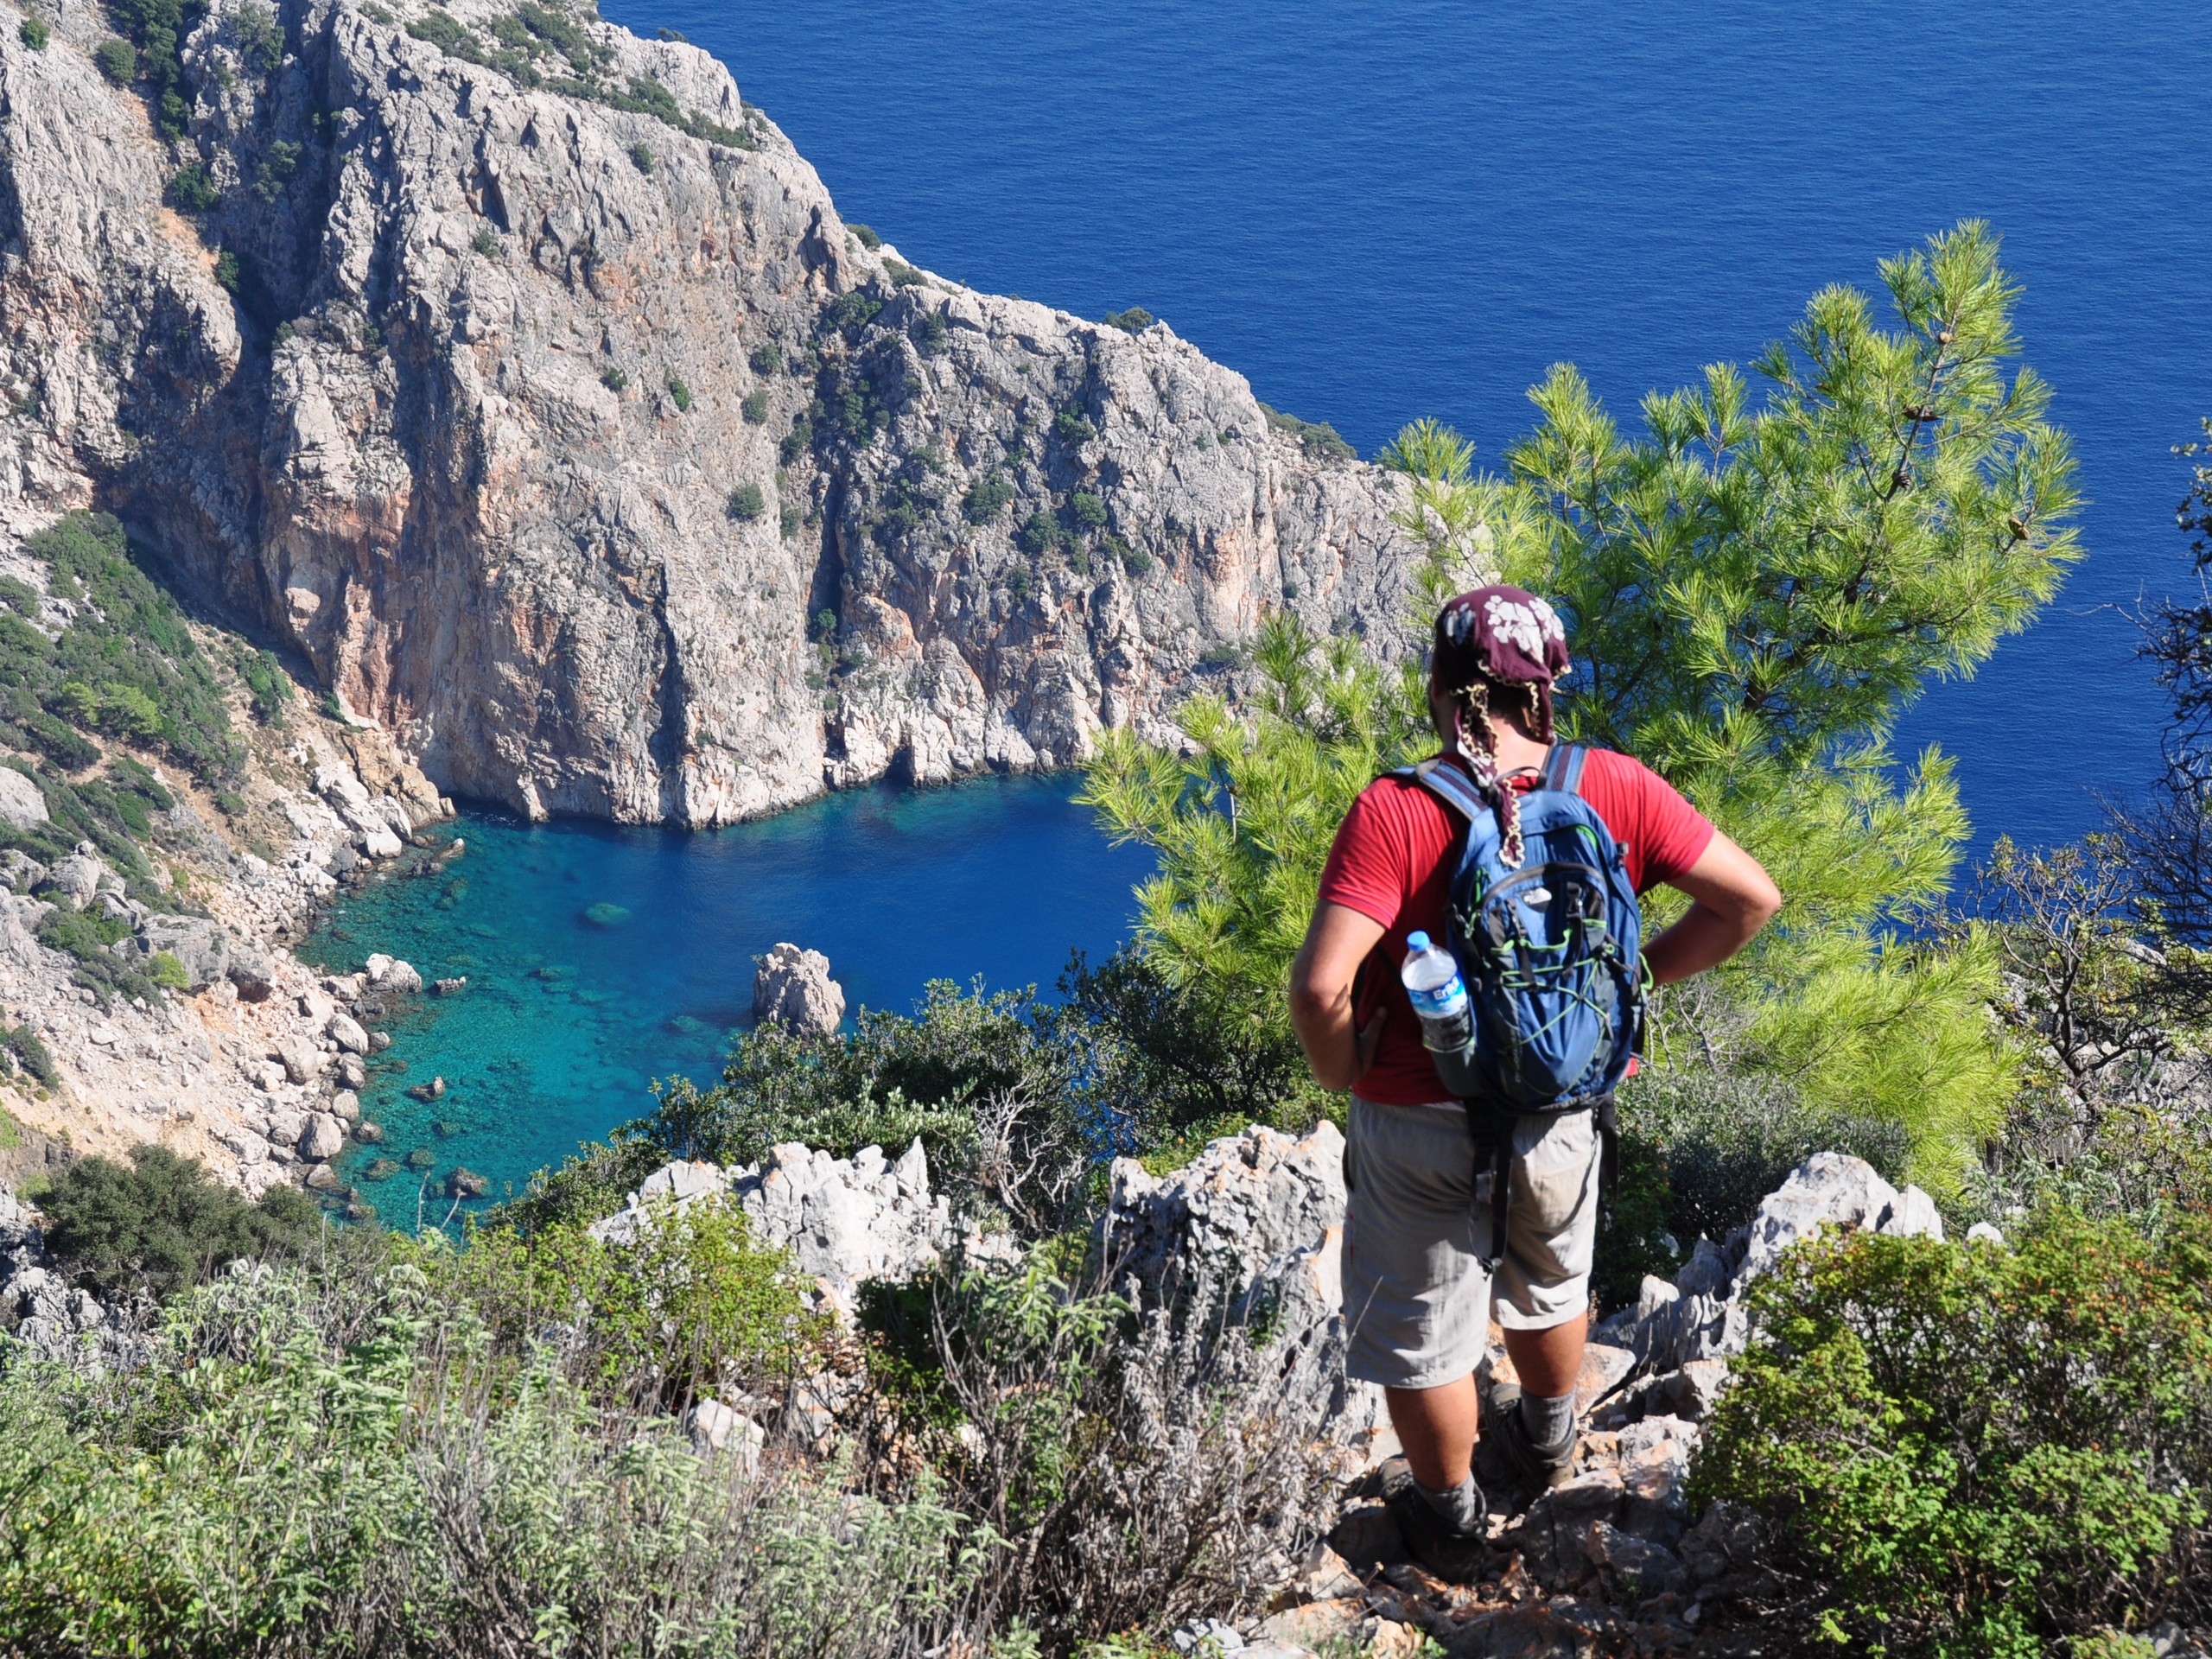 Looking at the small beautiful cove while trekking the Lycian Way